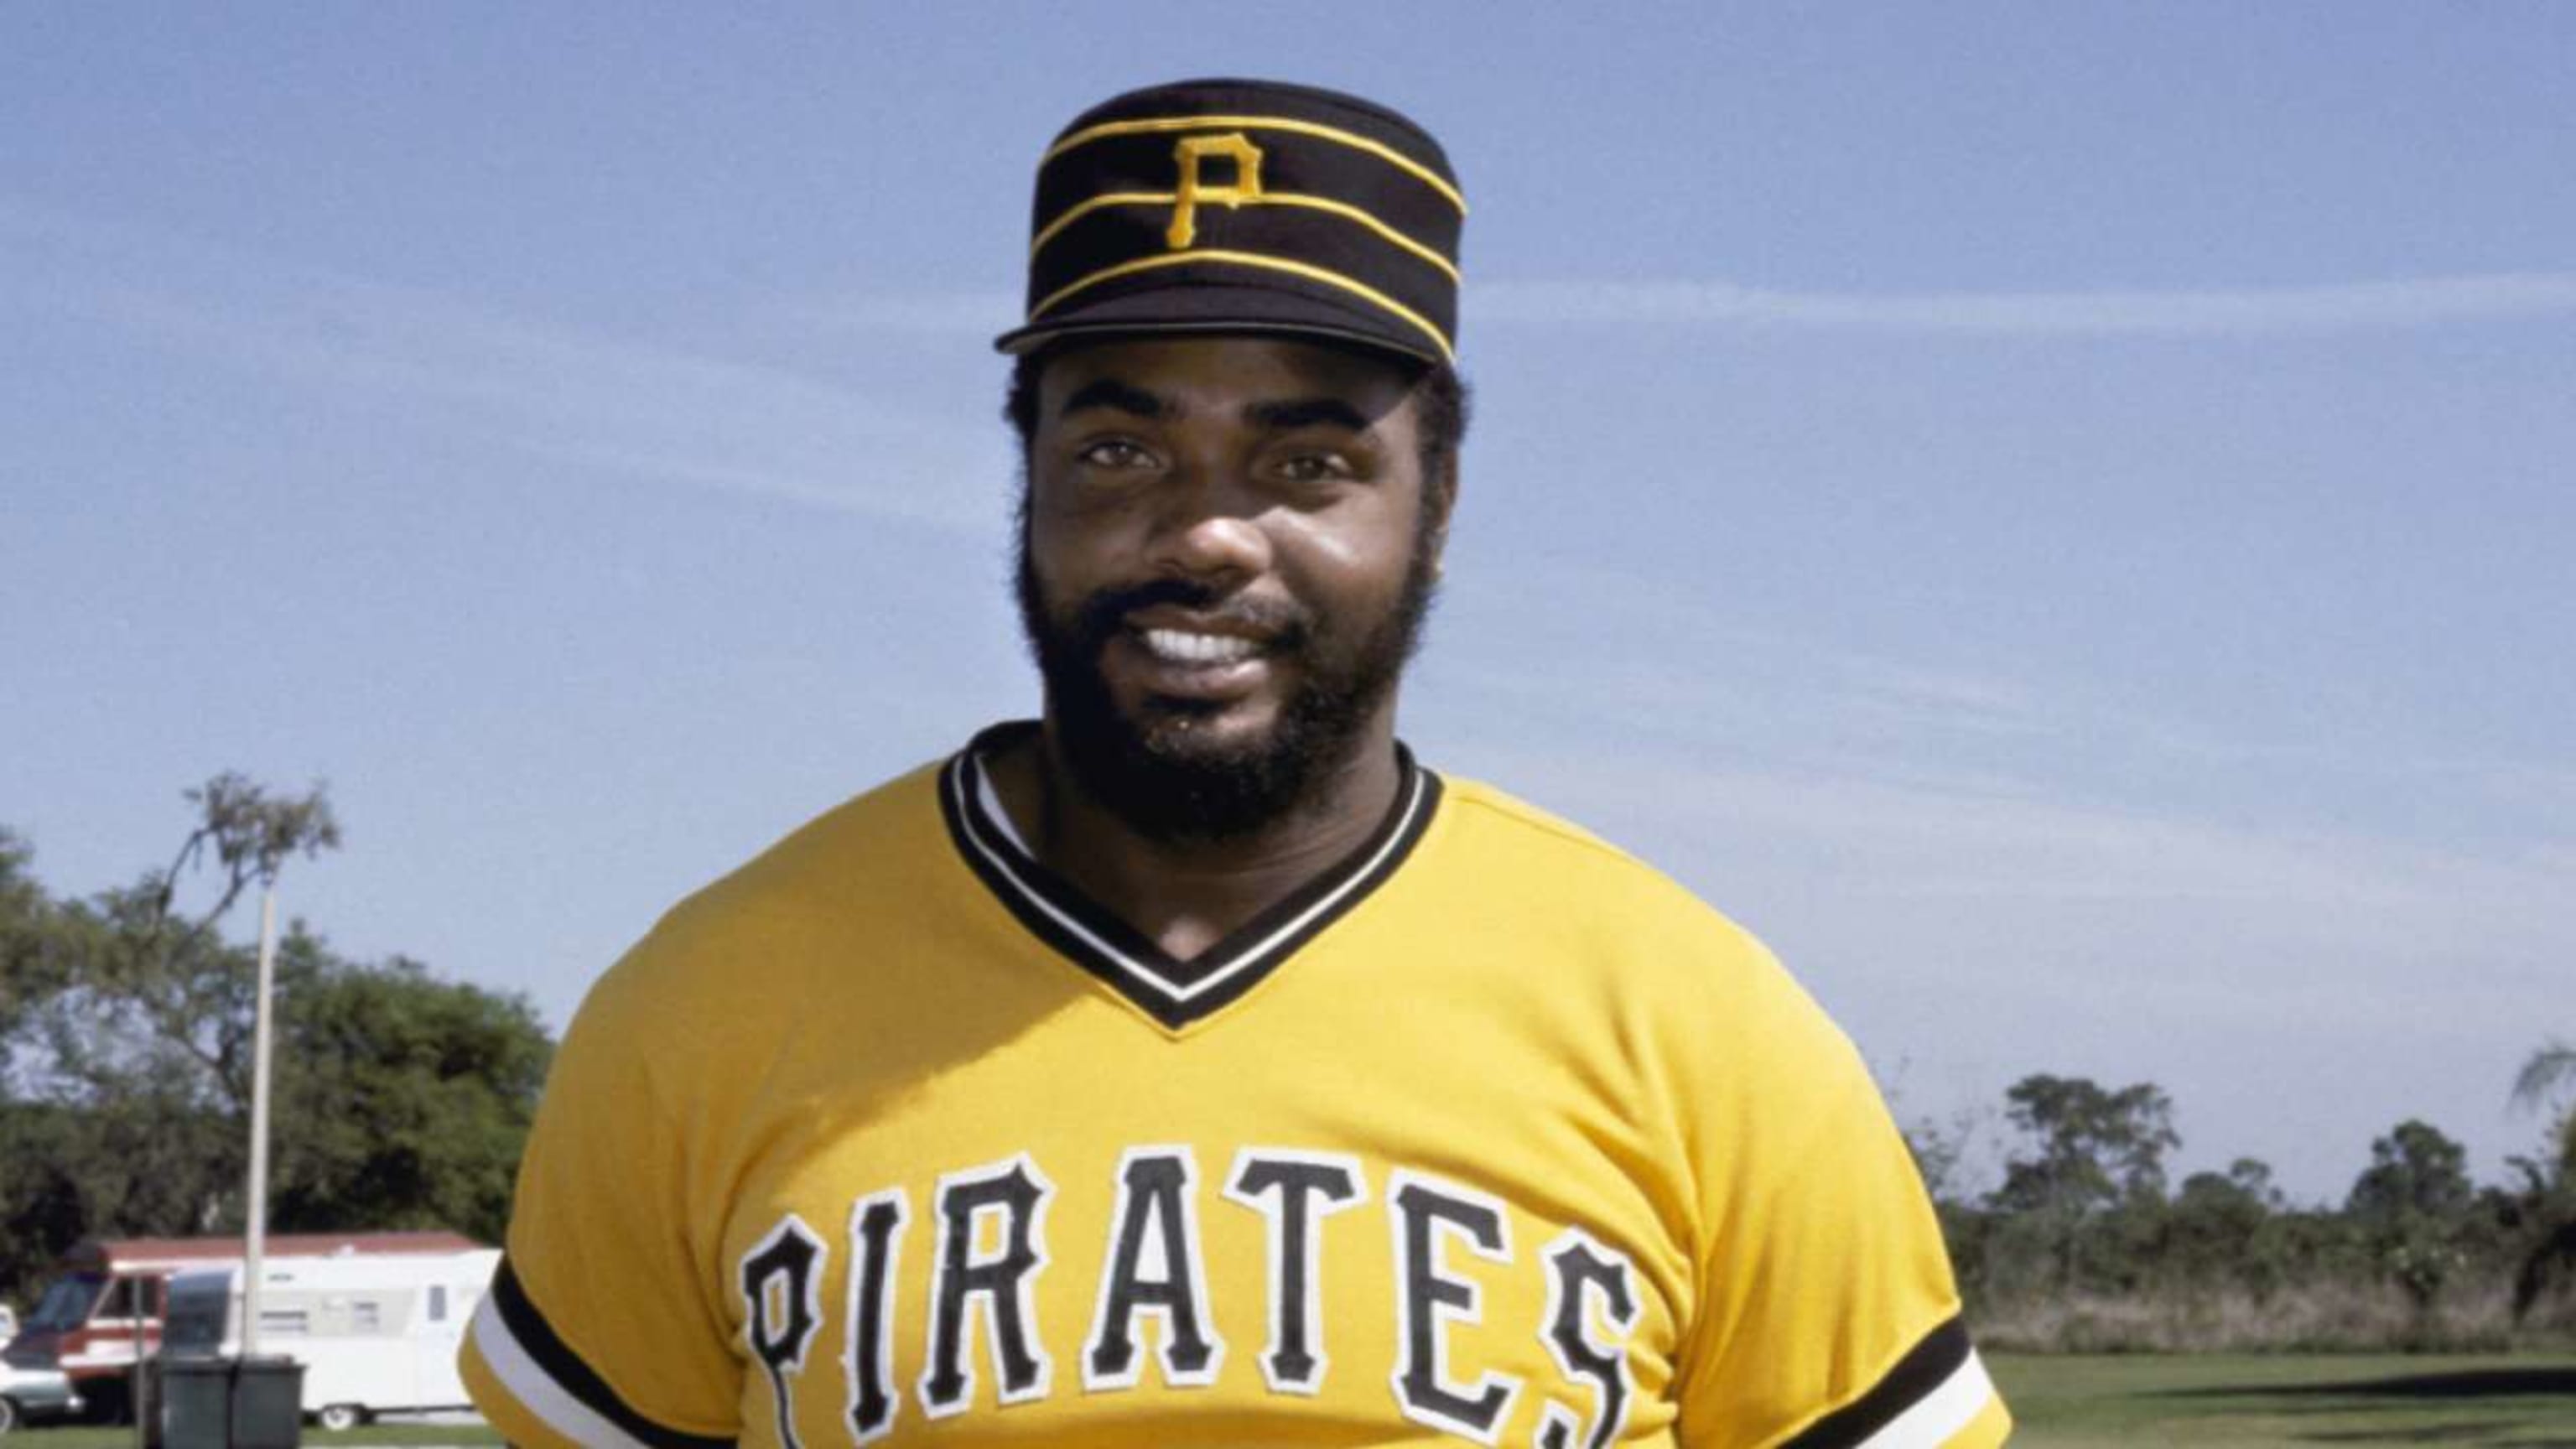 Official Dave Parker Pittsburgh Pirates Jerseys, Pirates Dave Parker  Baseball Jerseys, Uniforms